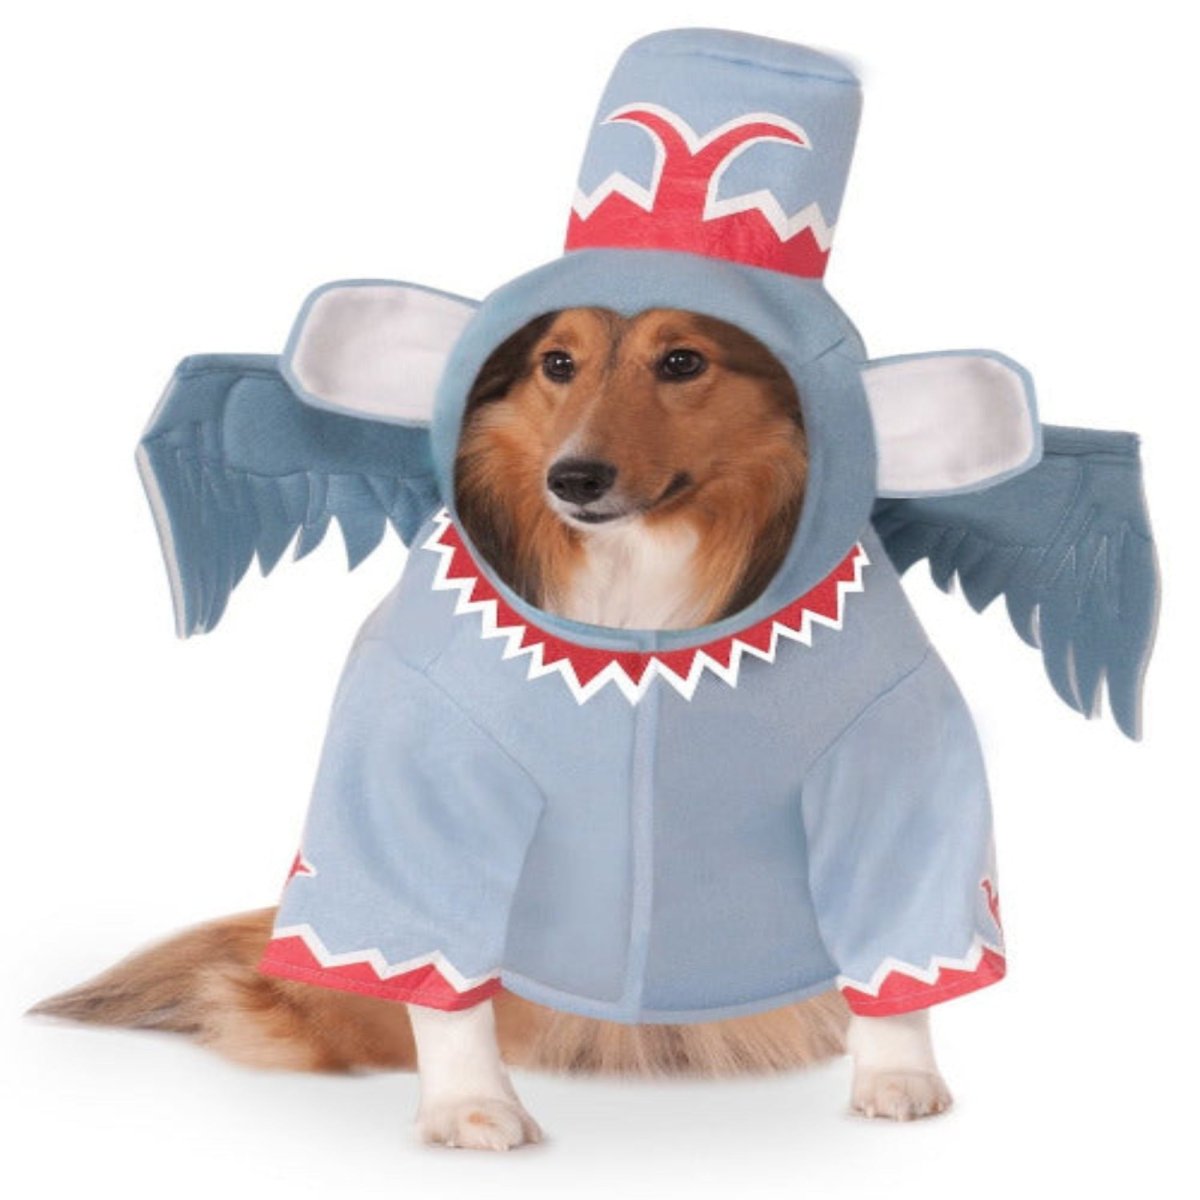 Rubies Costume Wizard of Oz Collection Pet Costume - worldclasscostumes